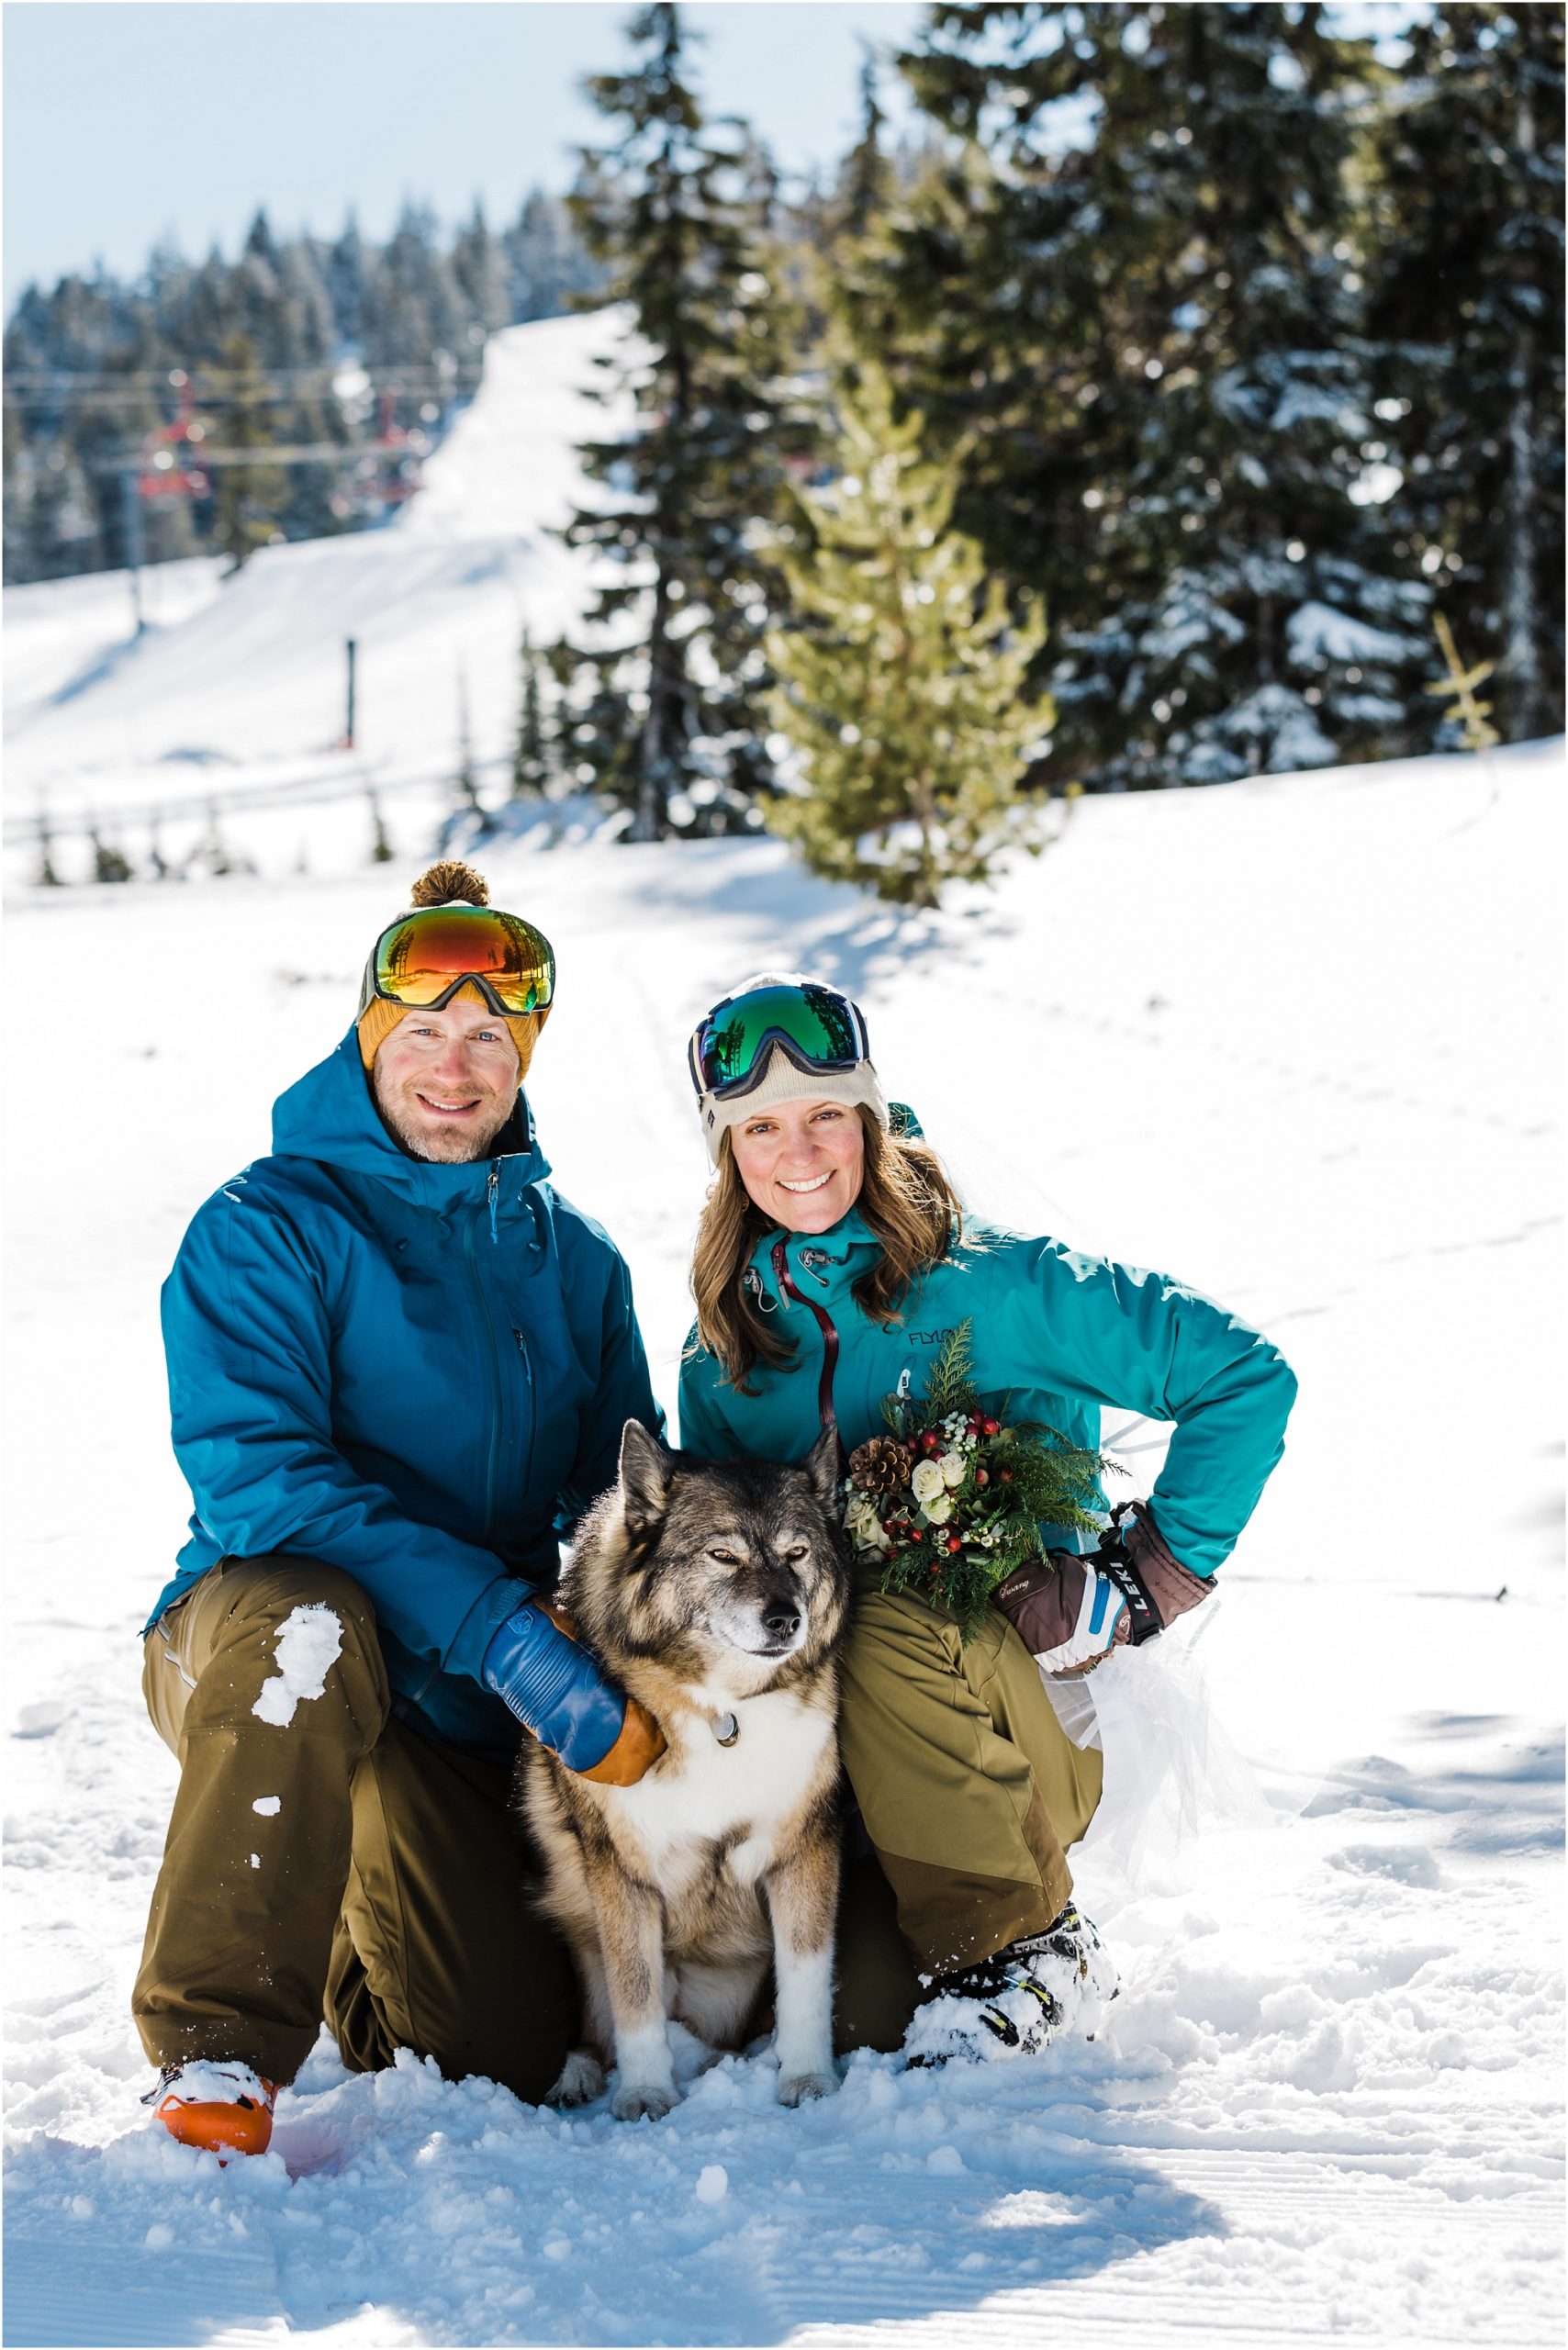 A bride wearing a white tutu and veil over her ski clothes, poses with her groom and dog on the slopes of Mt Bachelor ski resort in Oregon.. | Erica Swantek Photography